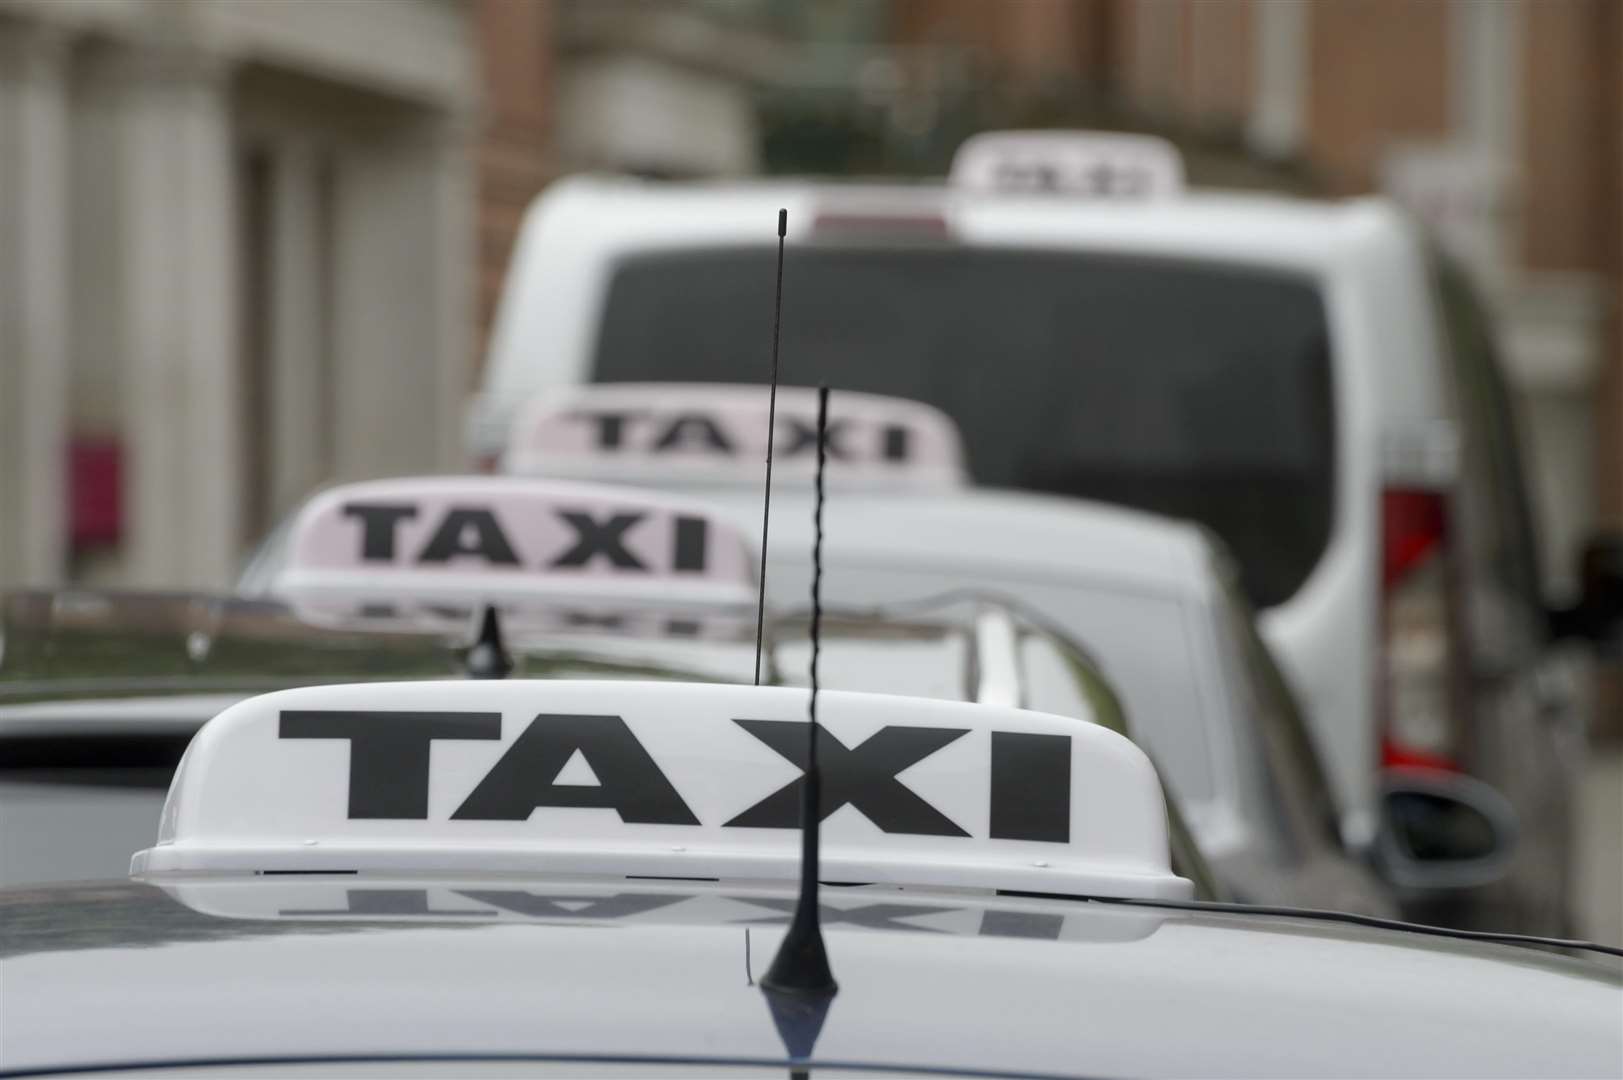 Police want to speak to a Canterbury taxi driver